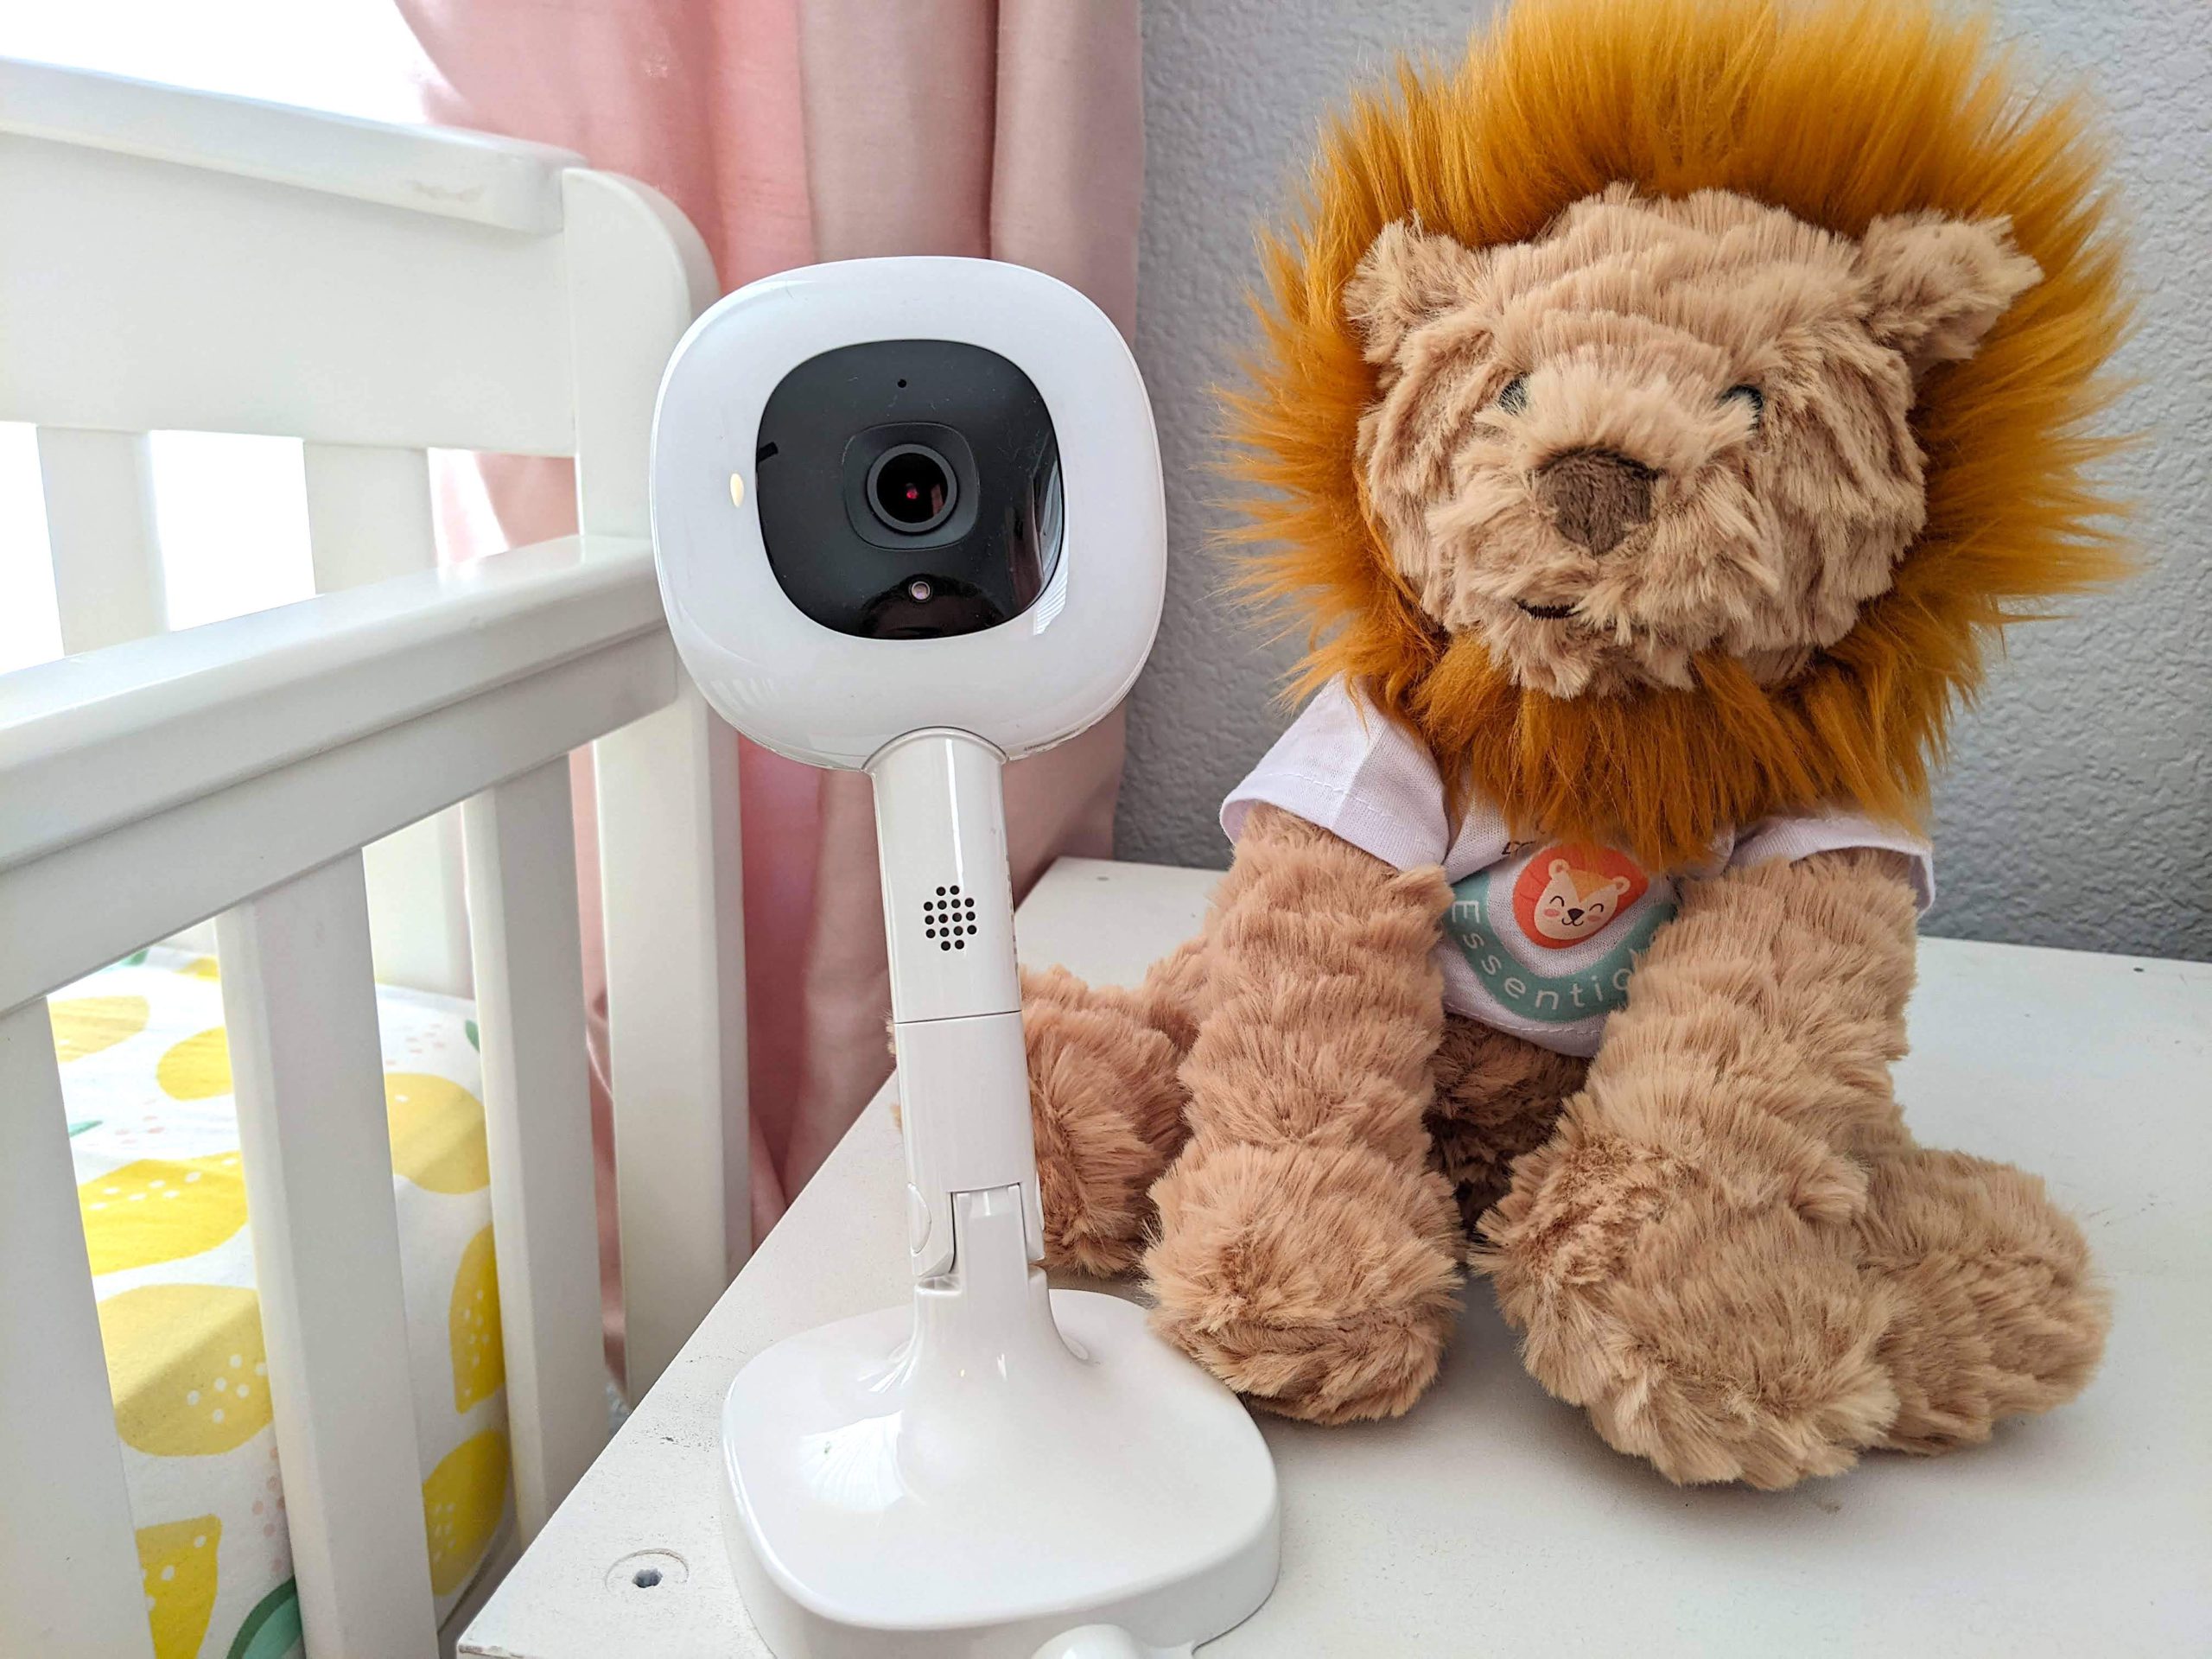 Nanit Pro Overall Best Baby Monitor